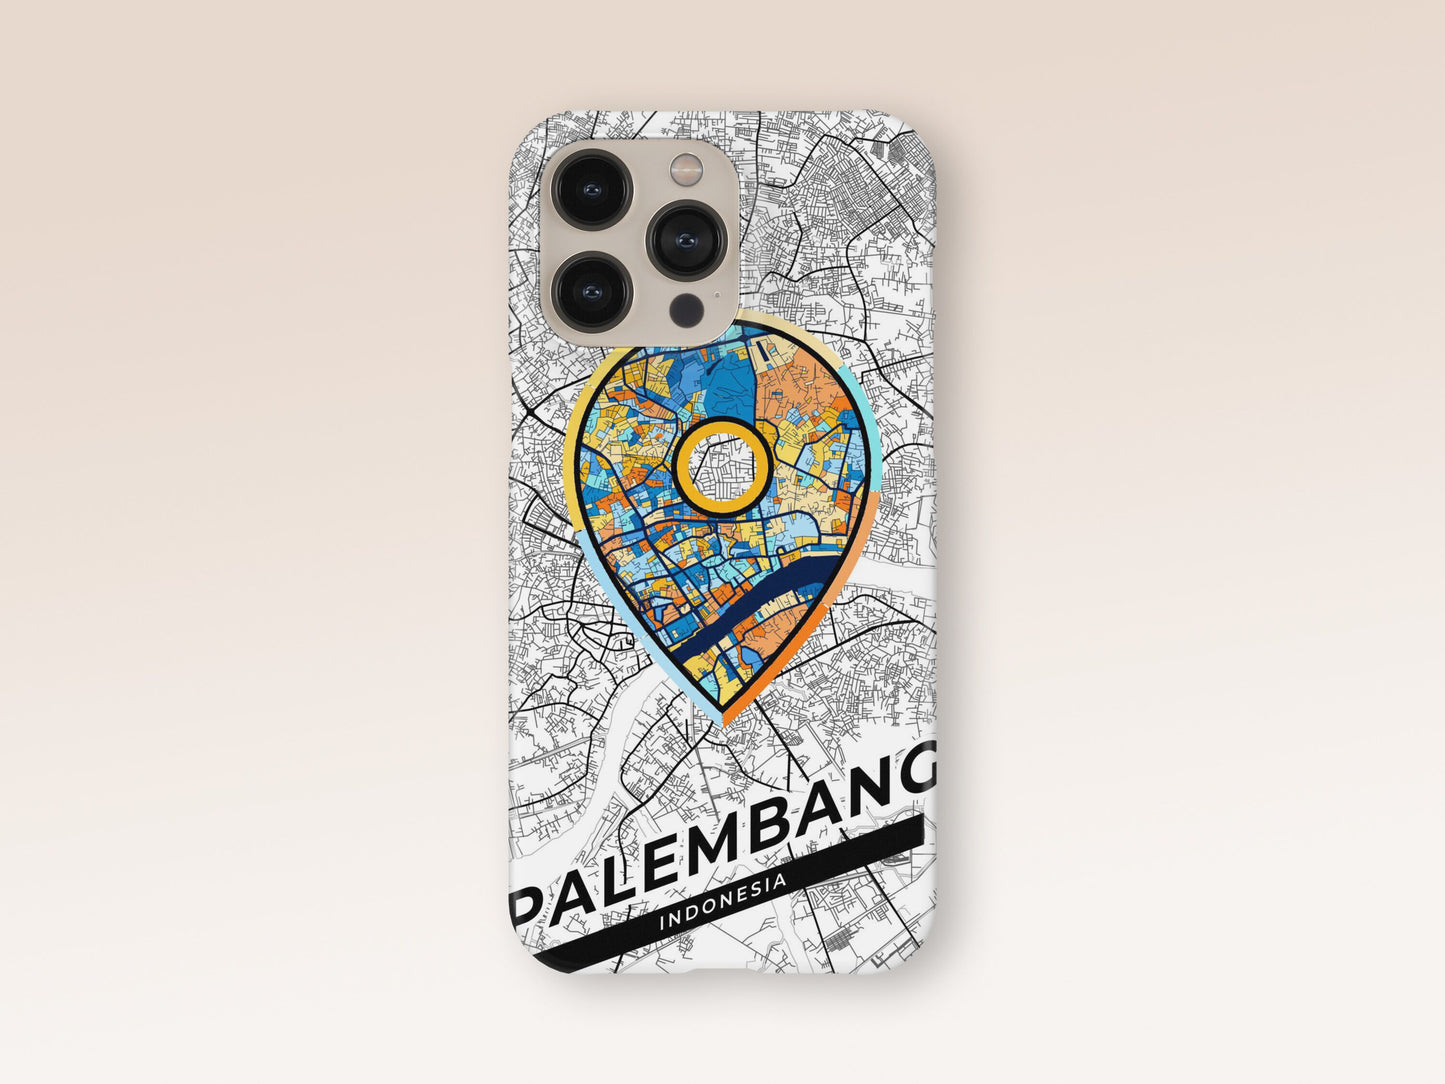 Palembang Indonesia slim phone case with colorful icon 1